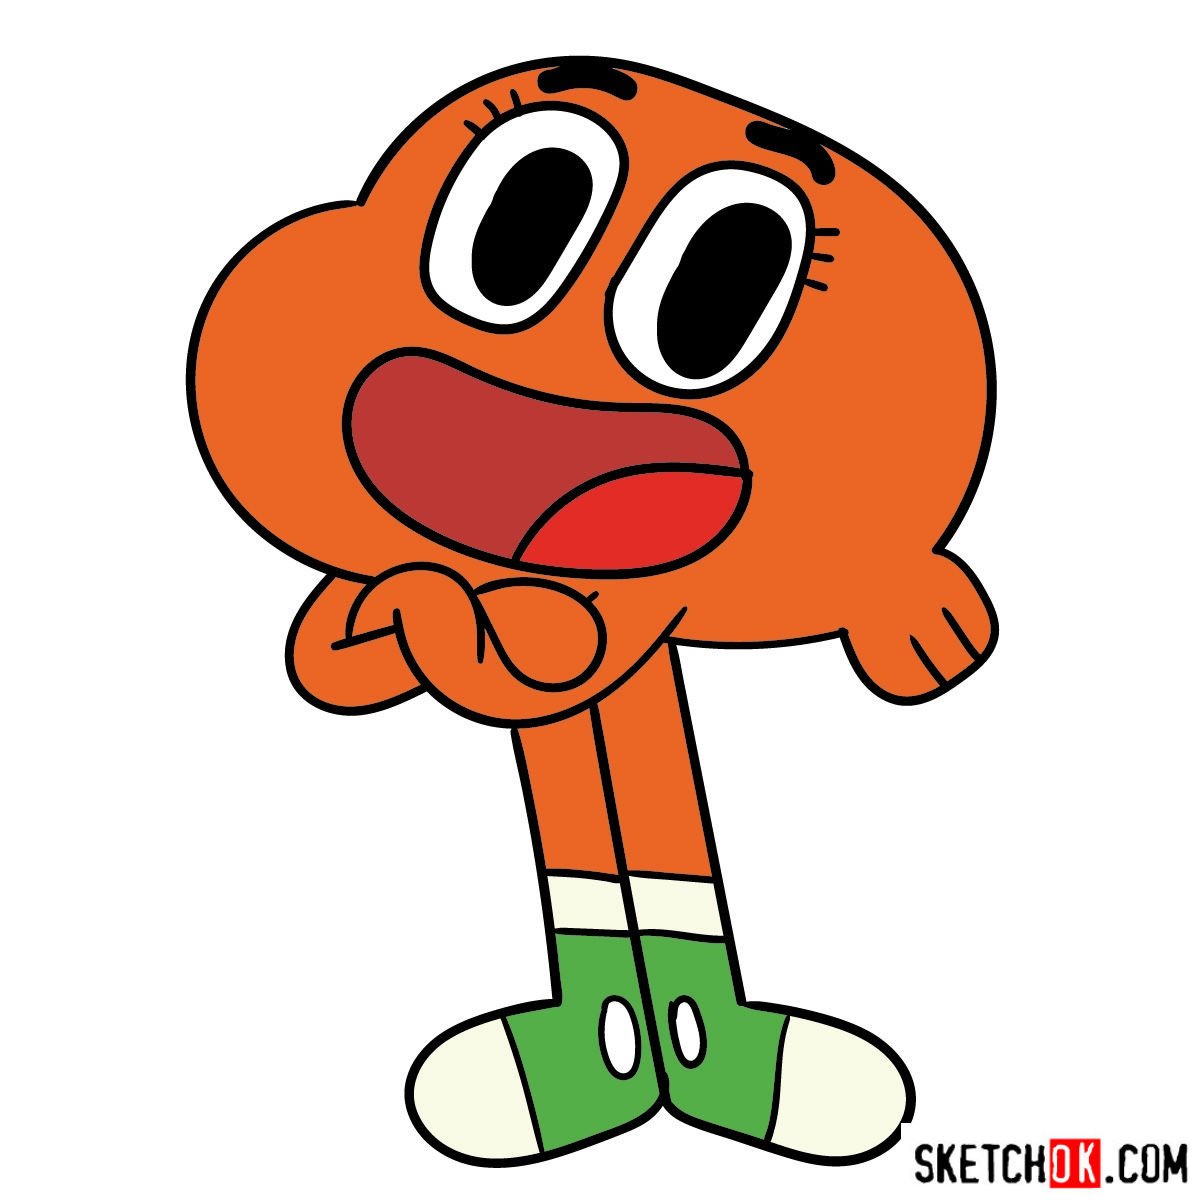 How to draw The Amazing World of Gumball characters SketchOk